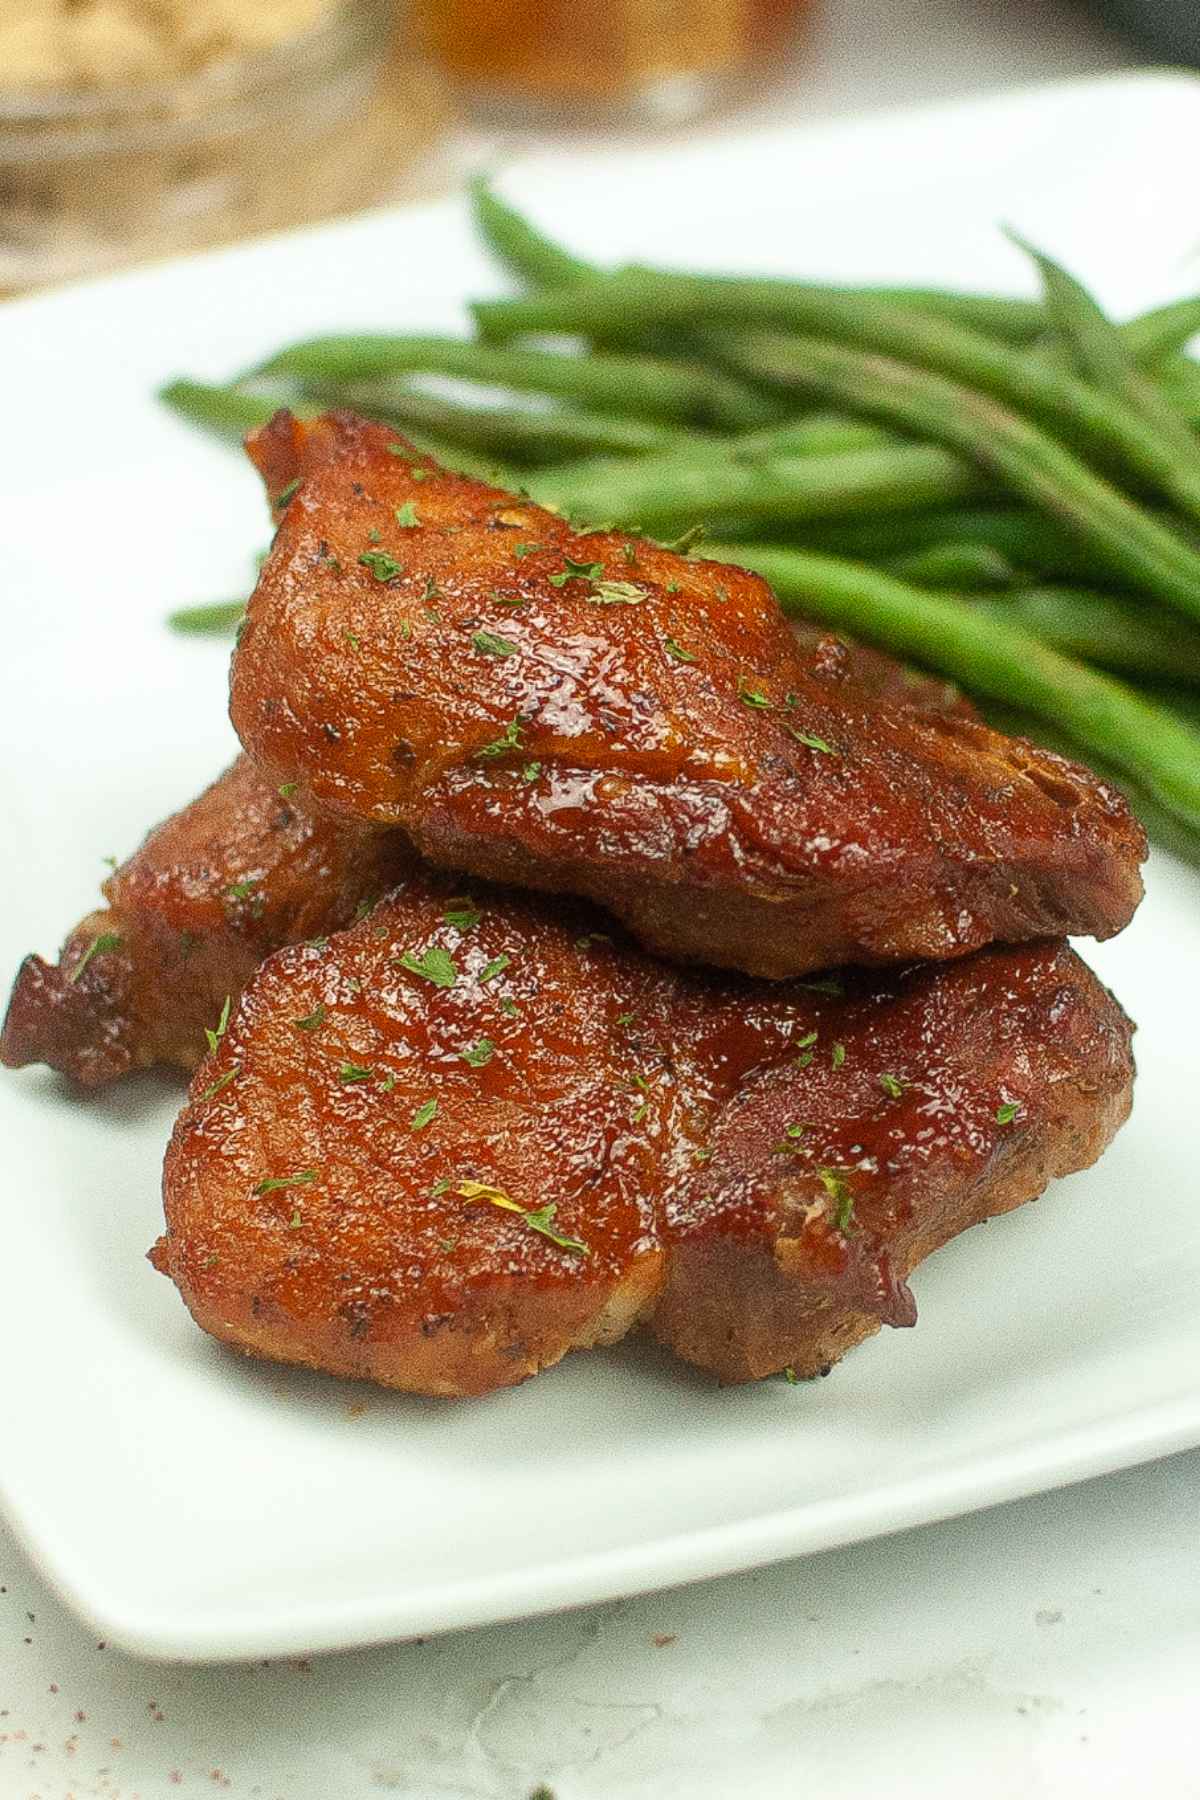 Up close image of ribs on a plate with a side of green beans.